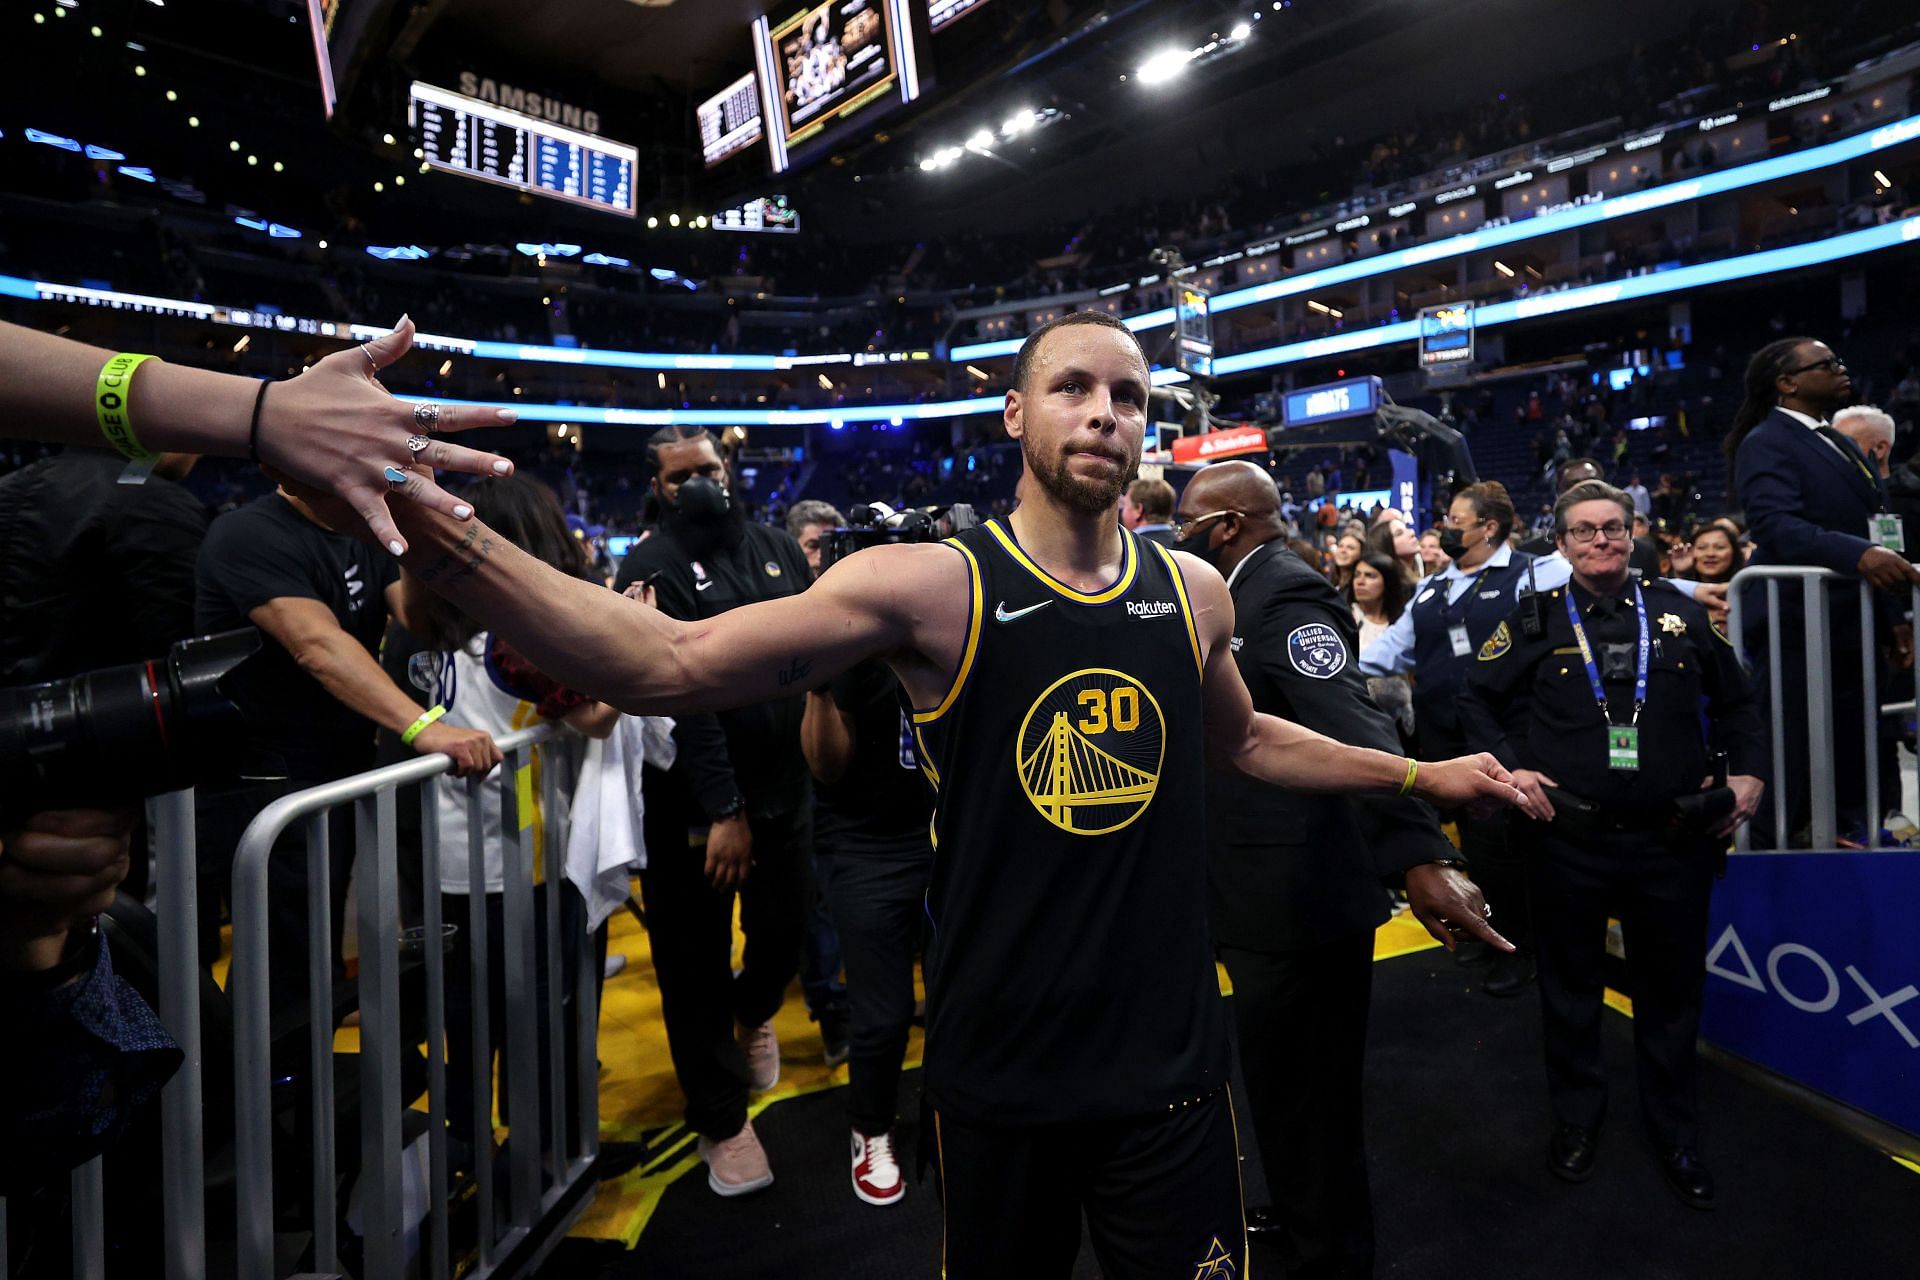 Steph Curry No. 30 of the Golden State Warriors walks off the court after they beat the Denver Nuggets in Game 5 of the Western Conference&#039;s first round.